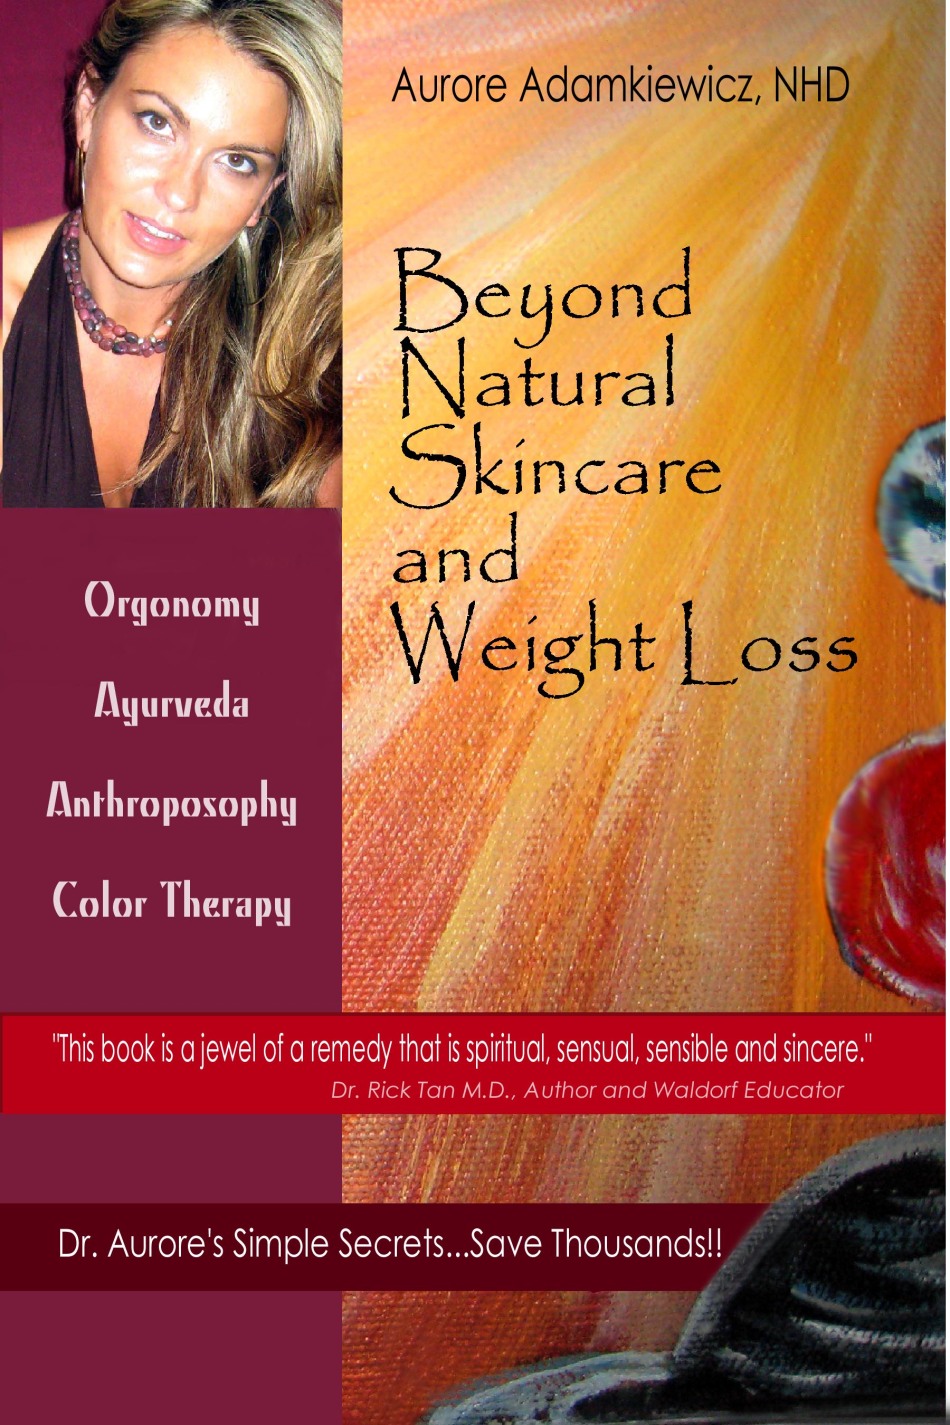 Beyond Natural Skincare and Weightloss